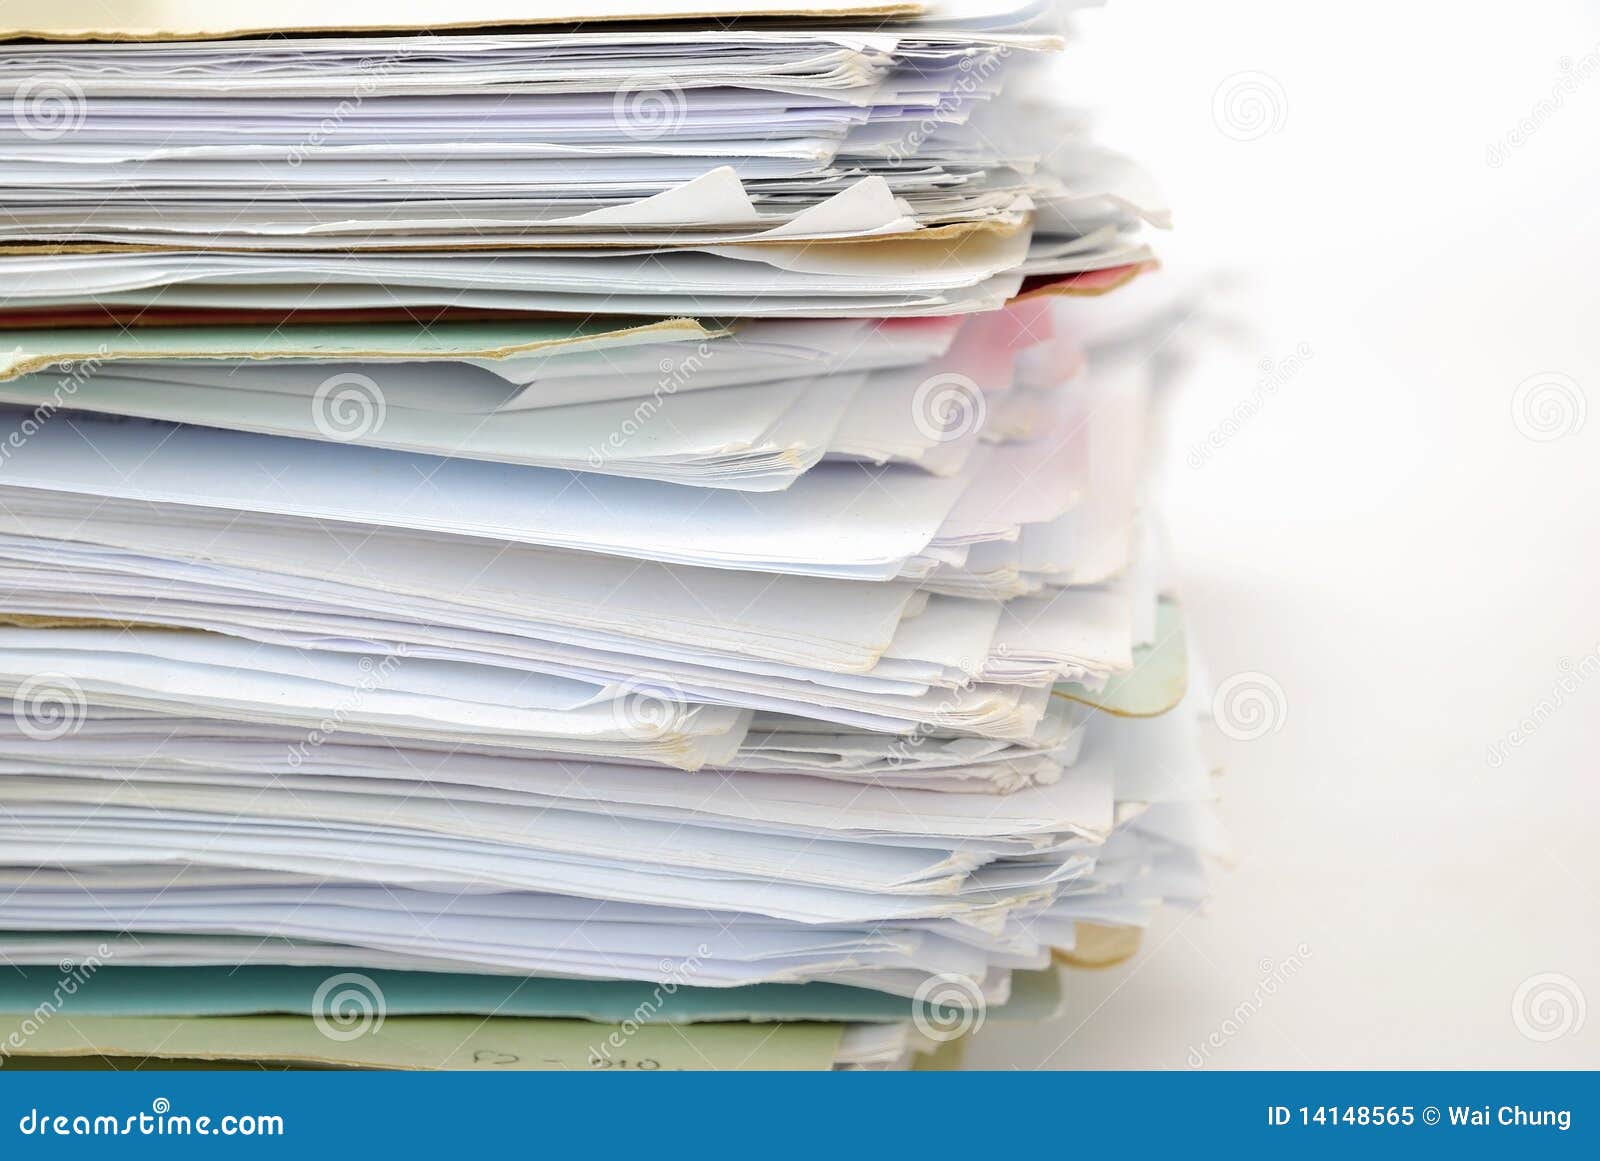 stack of files full of documents